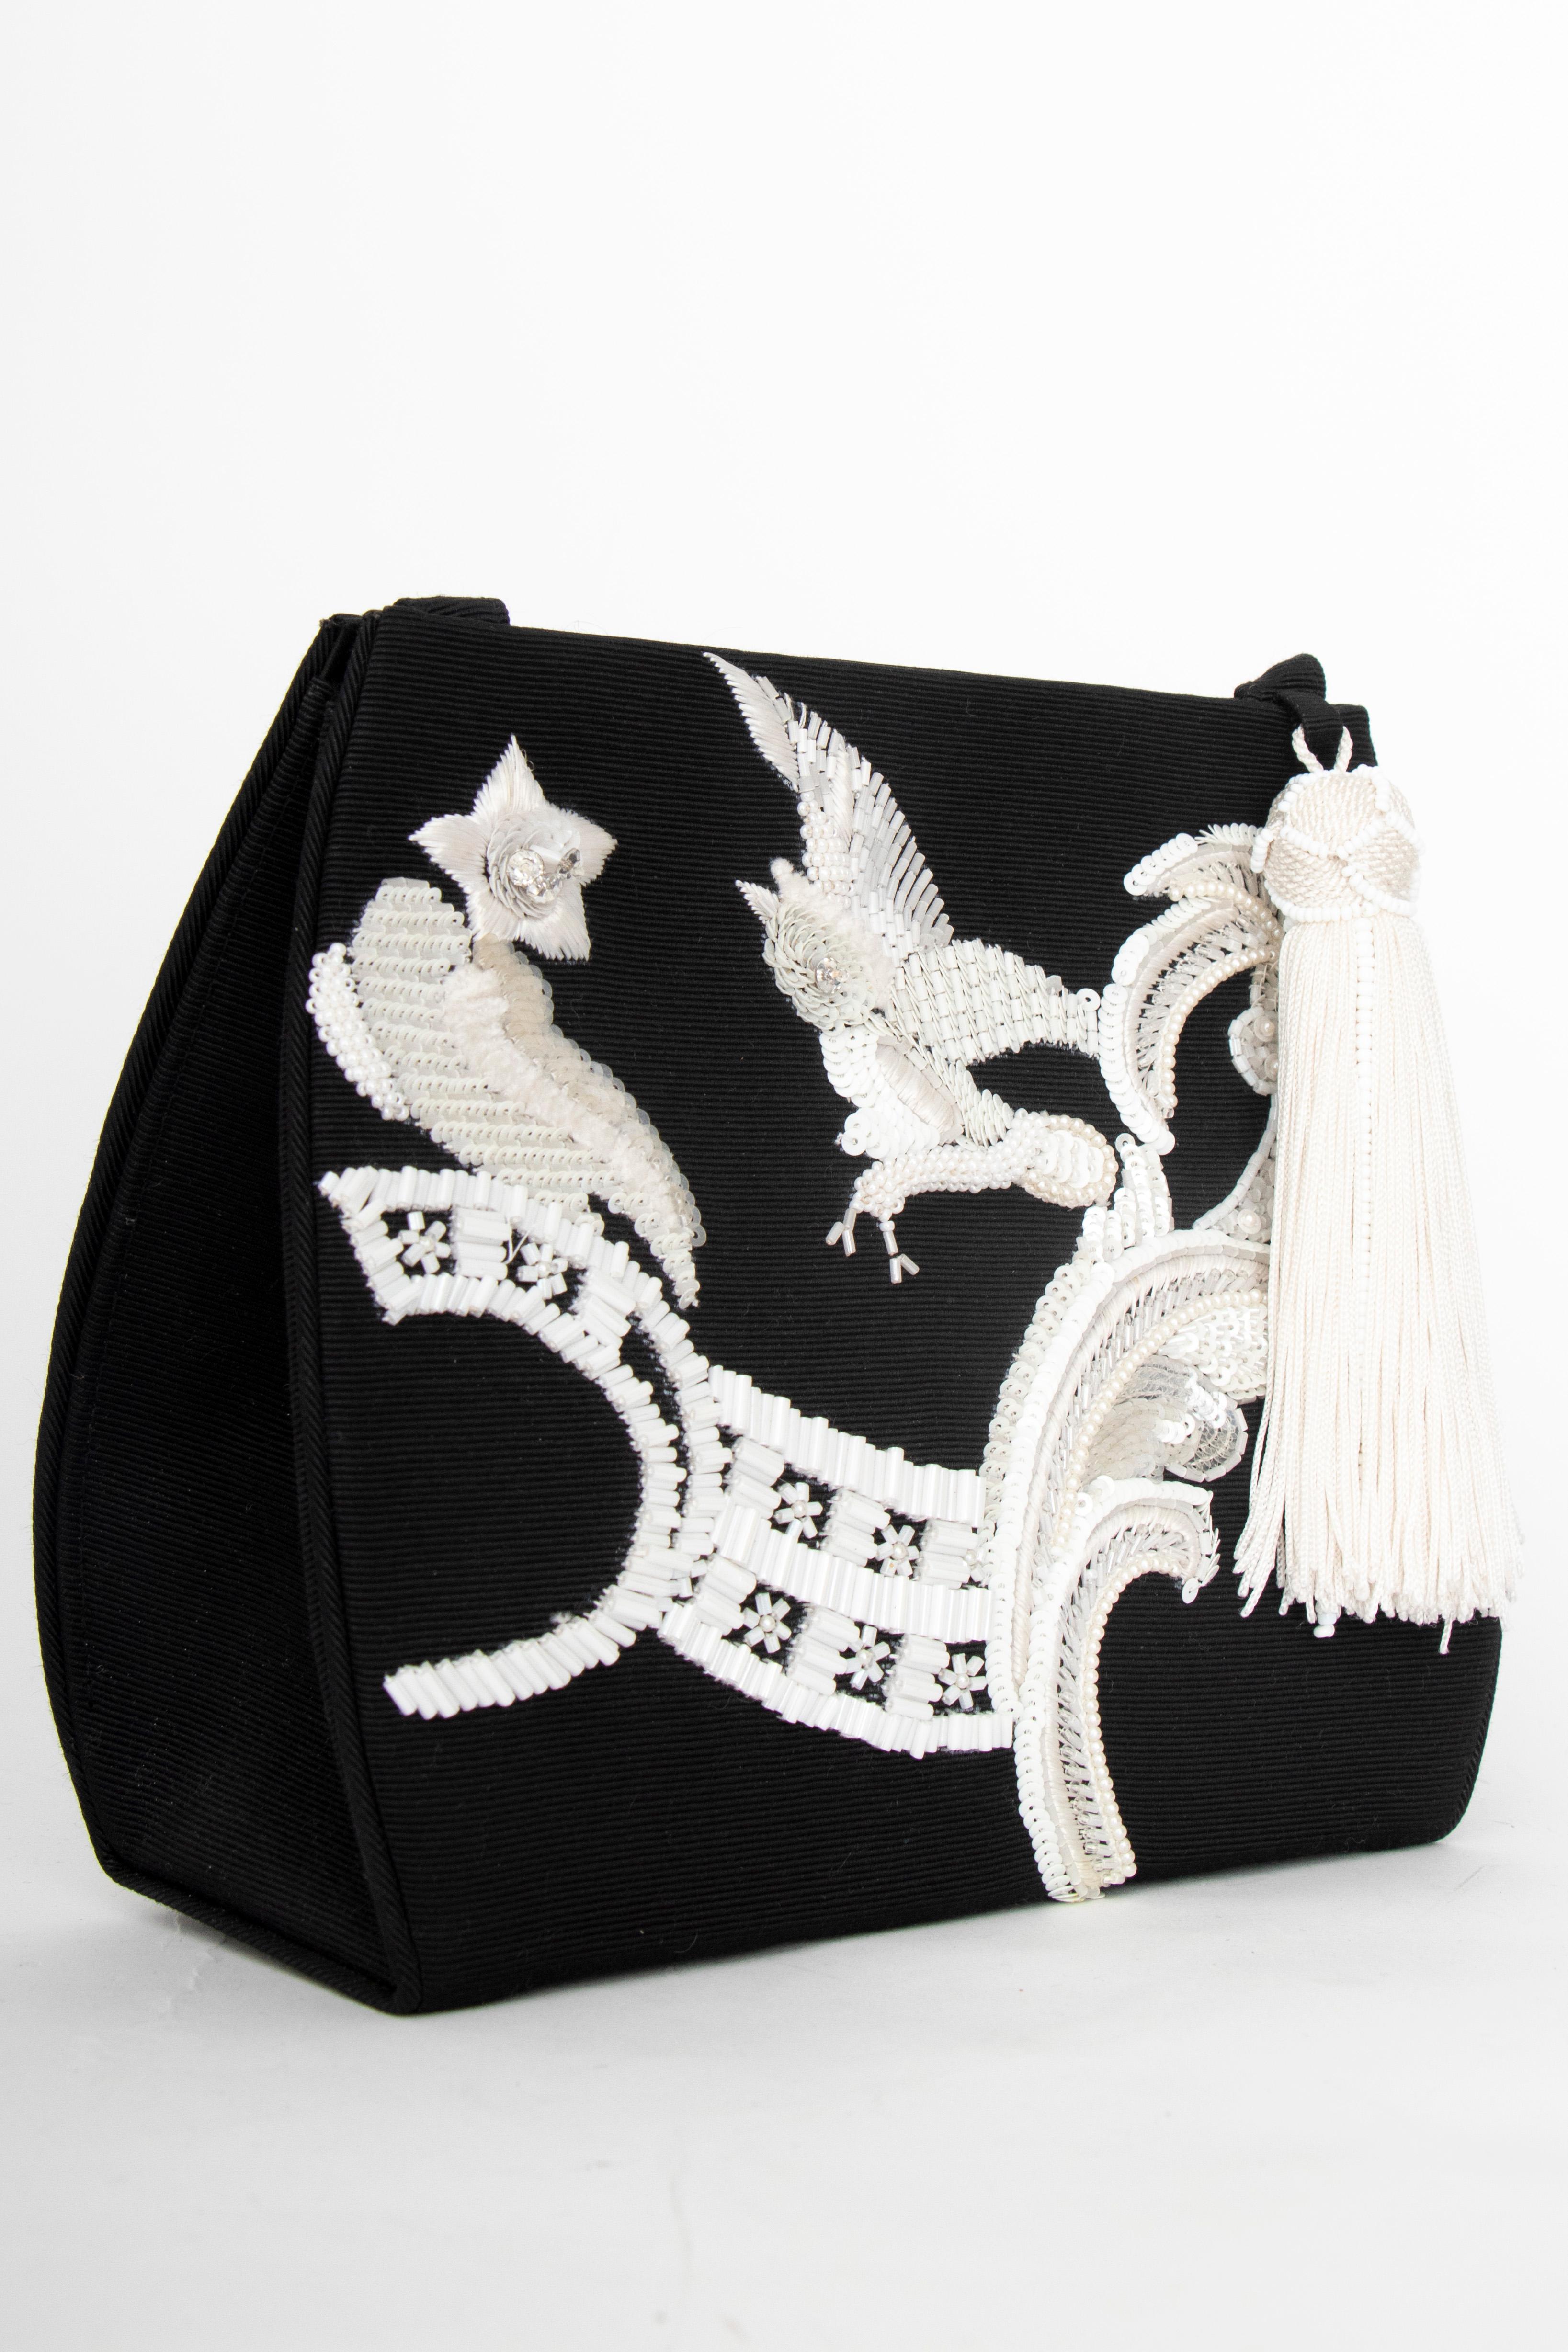 An incredible 1990s Christian Dior by John Galliano black evening bag with a thin shoulder strap and push-button closure. A bead and sequin owl and paisley motif adorn the front and a white tassel detail is placed at the top. 

The bag has the